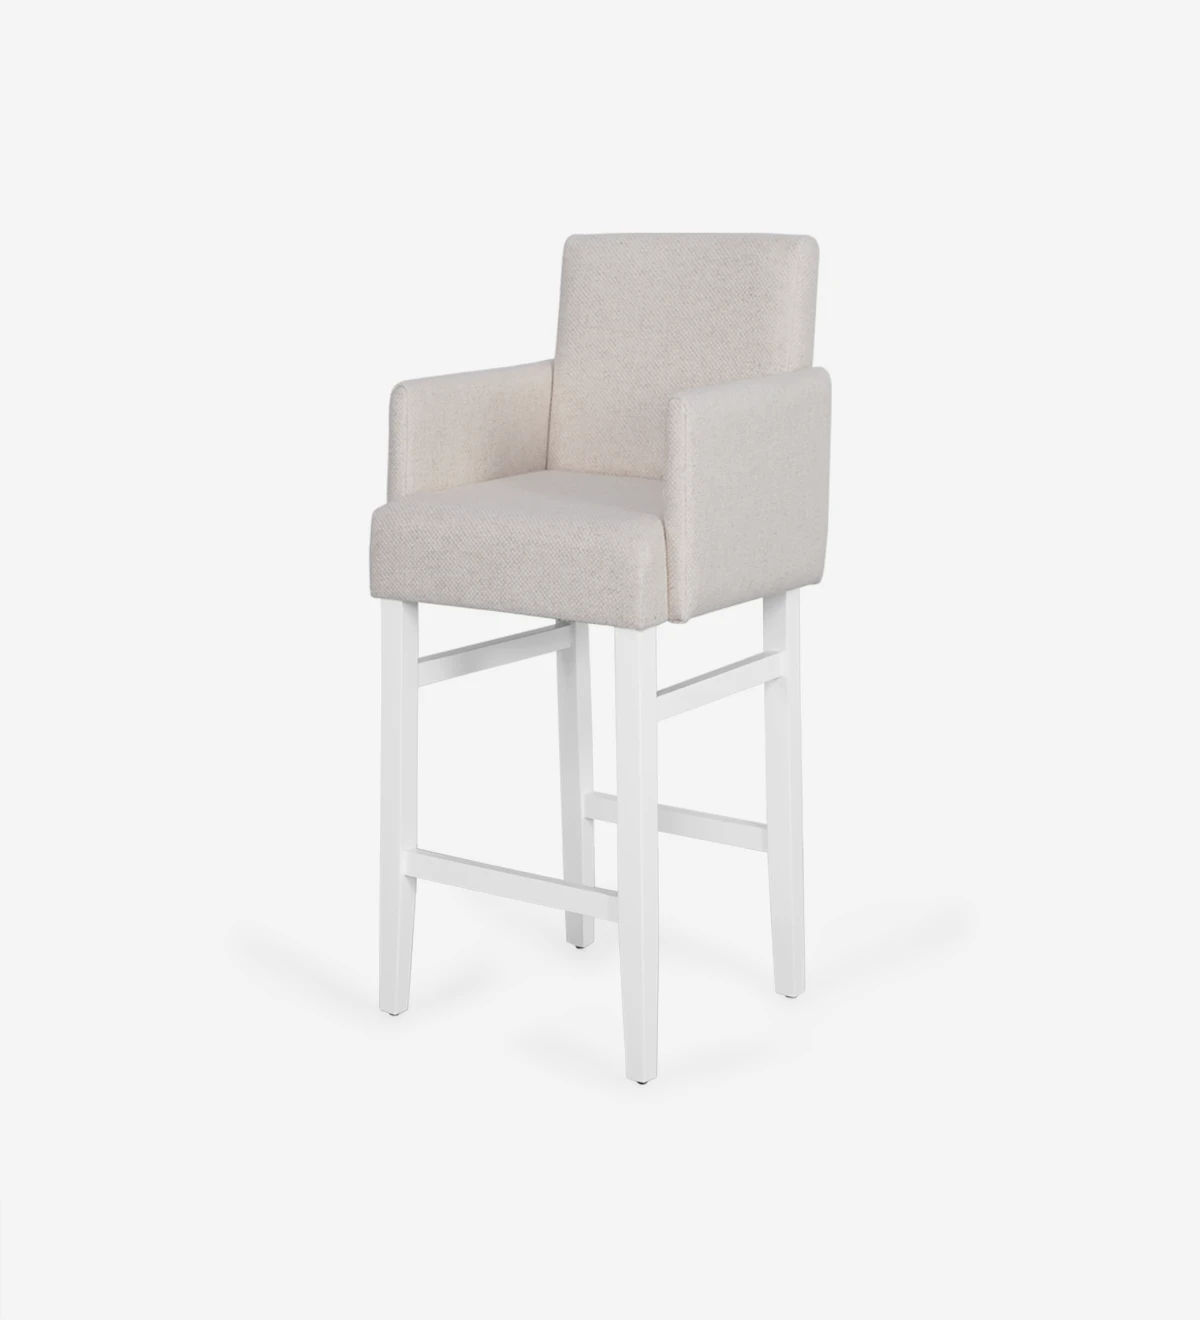 Stool with arms upholstered in fabric, with white lacquered feet.